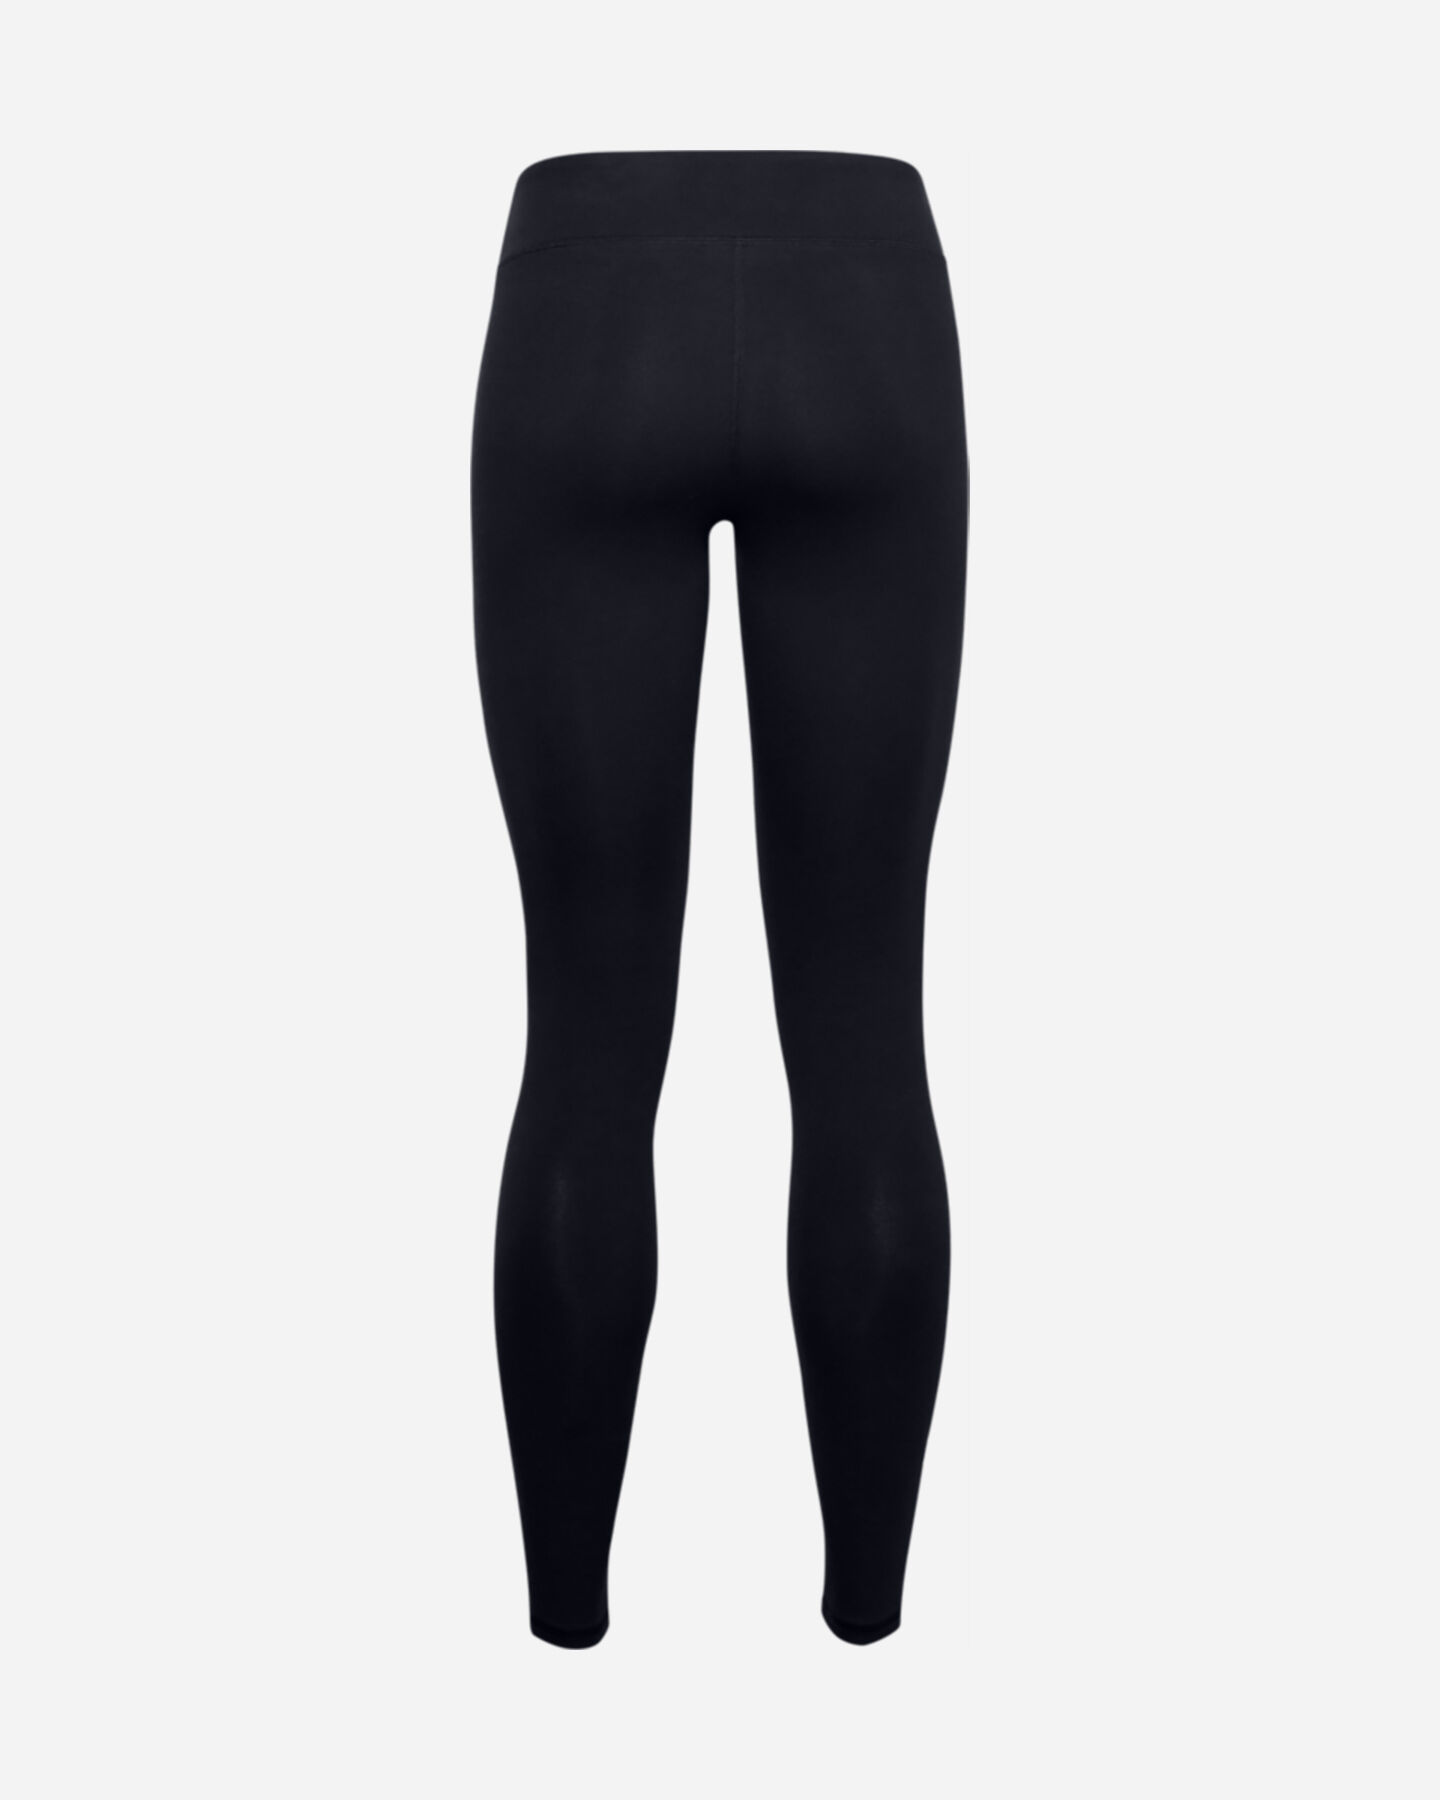  Leggings UNDER ARMOUR BIG LOGO LATERAL W S5229249 scatto 1